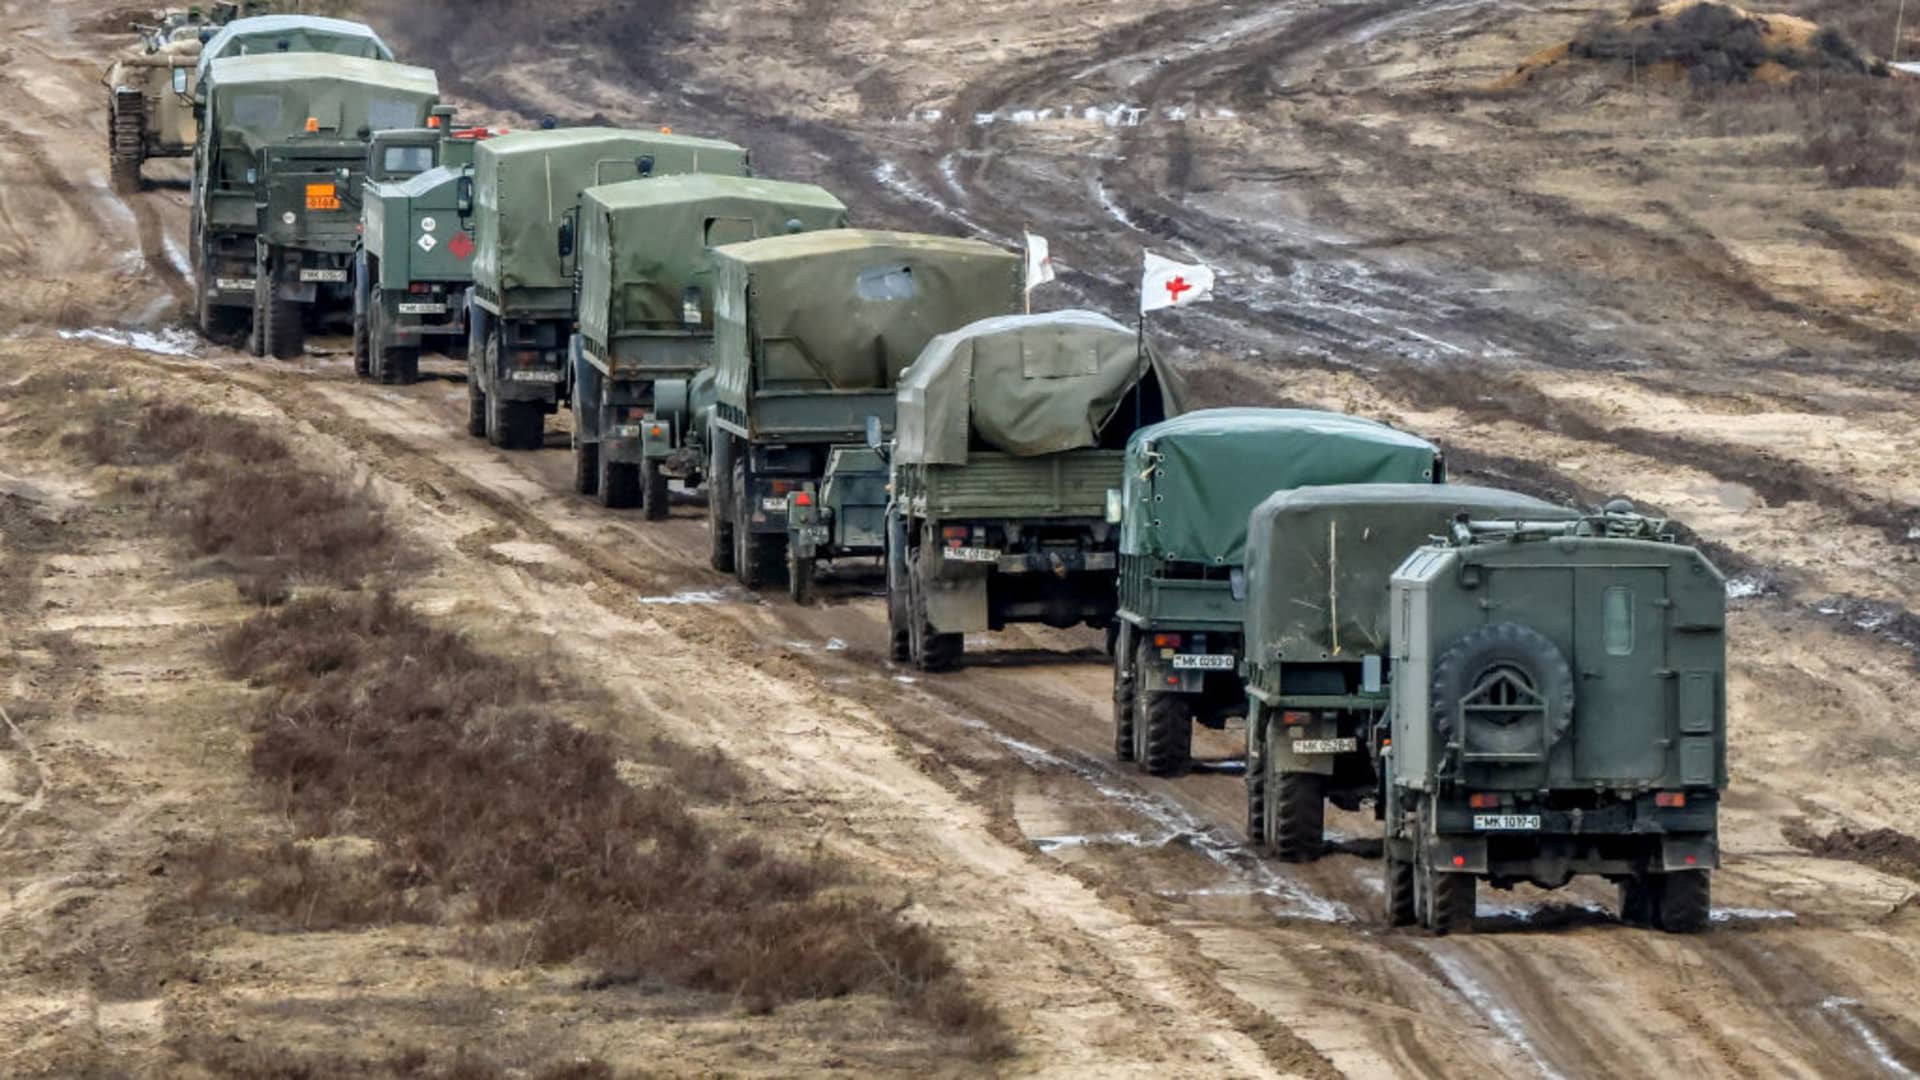 Allied Resolve 2022 joint military drills held by Belarusian and Russian troops at the Obuz-Lesnovsky training ground.